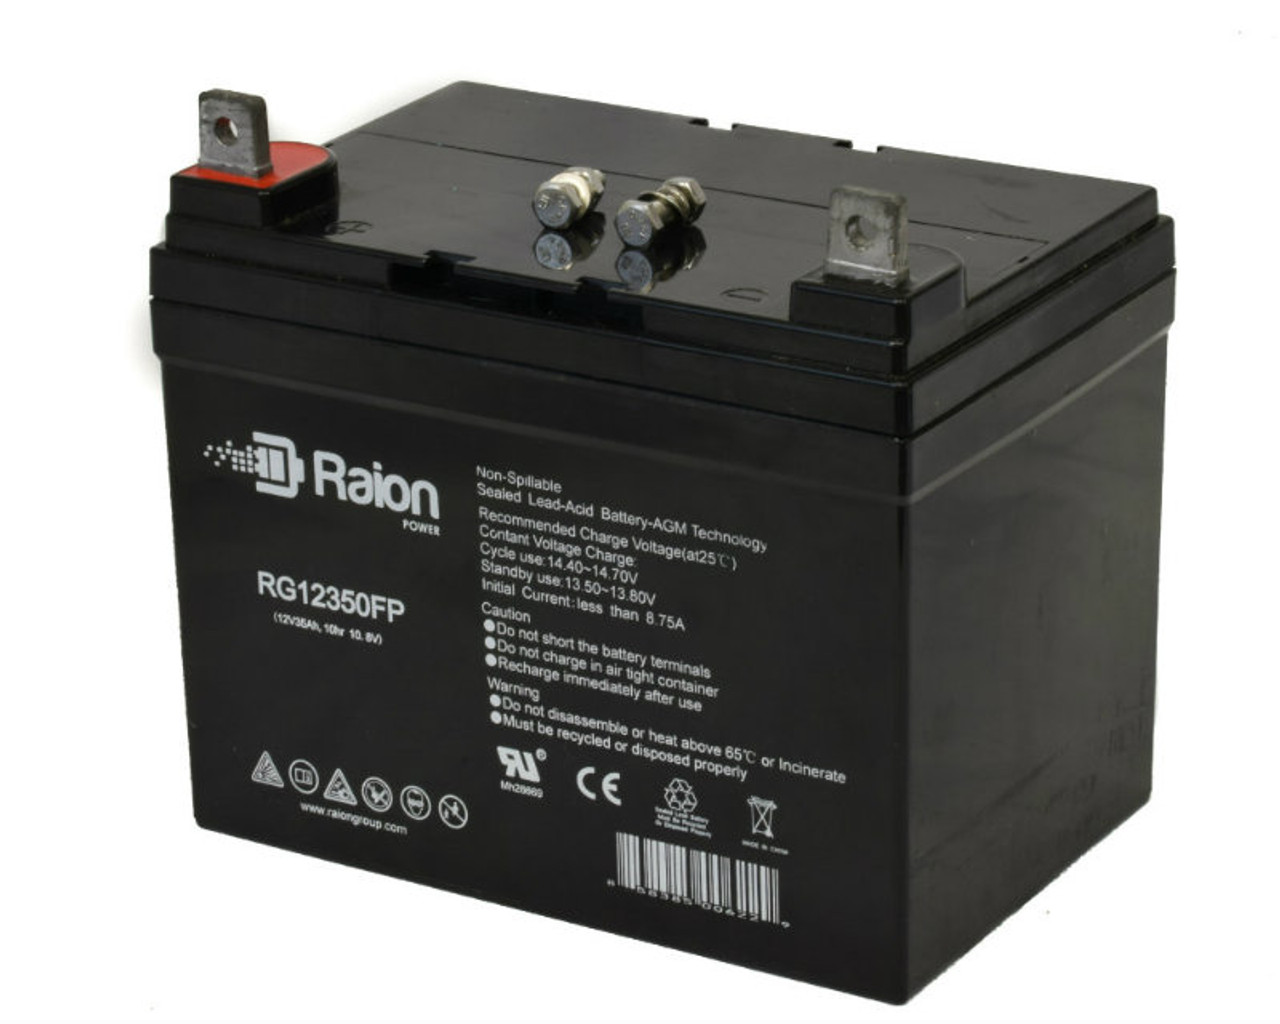 Raion Power Replacement 12V 35Ah RG12350FP Mobility Scooter Battery for Electric Mobility Rascal 600T Indoor / Outdoor Scooter